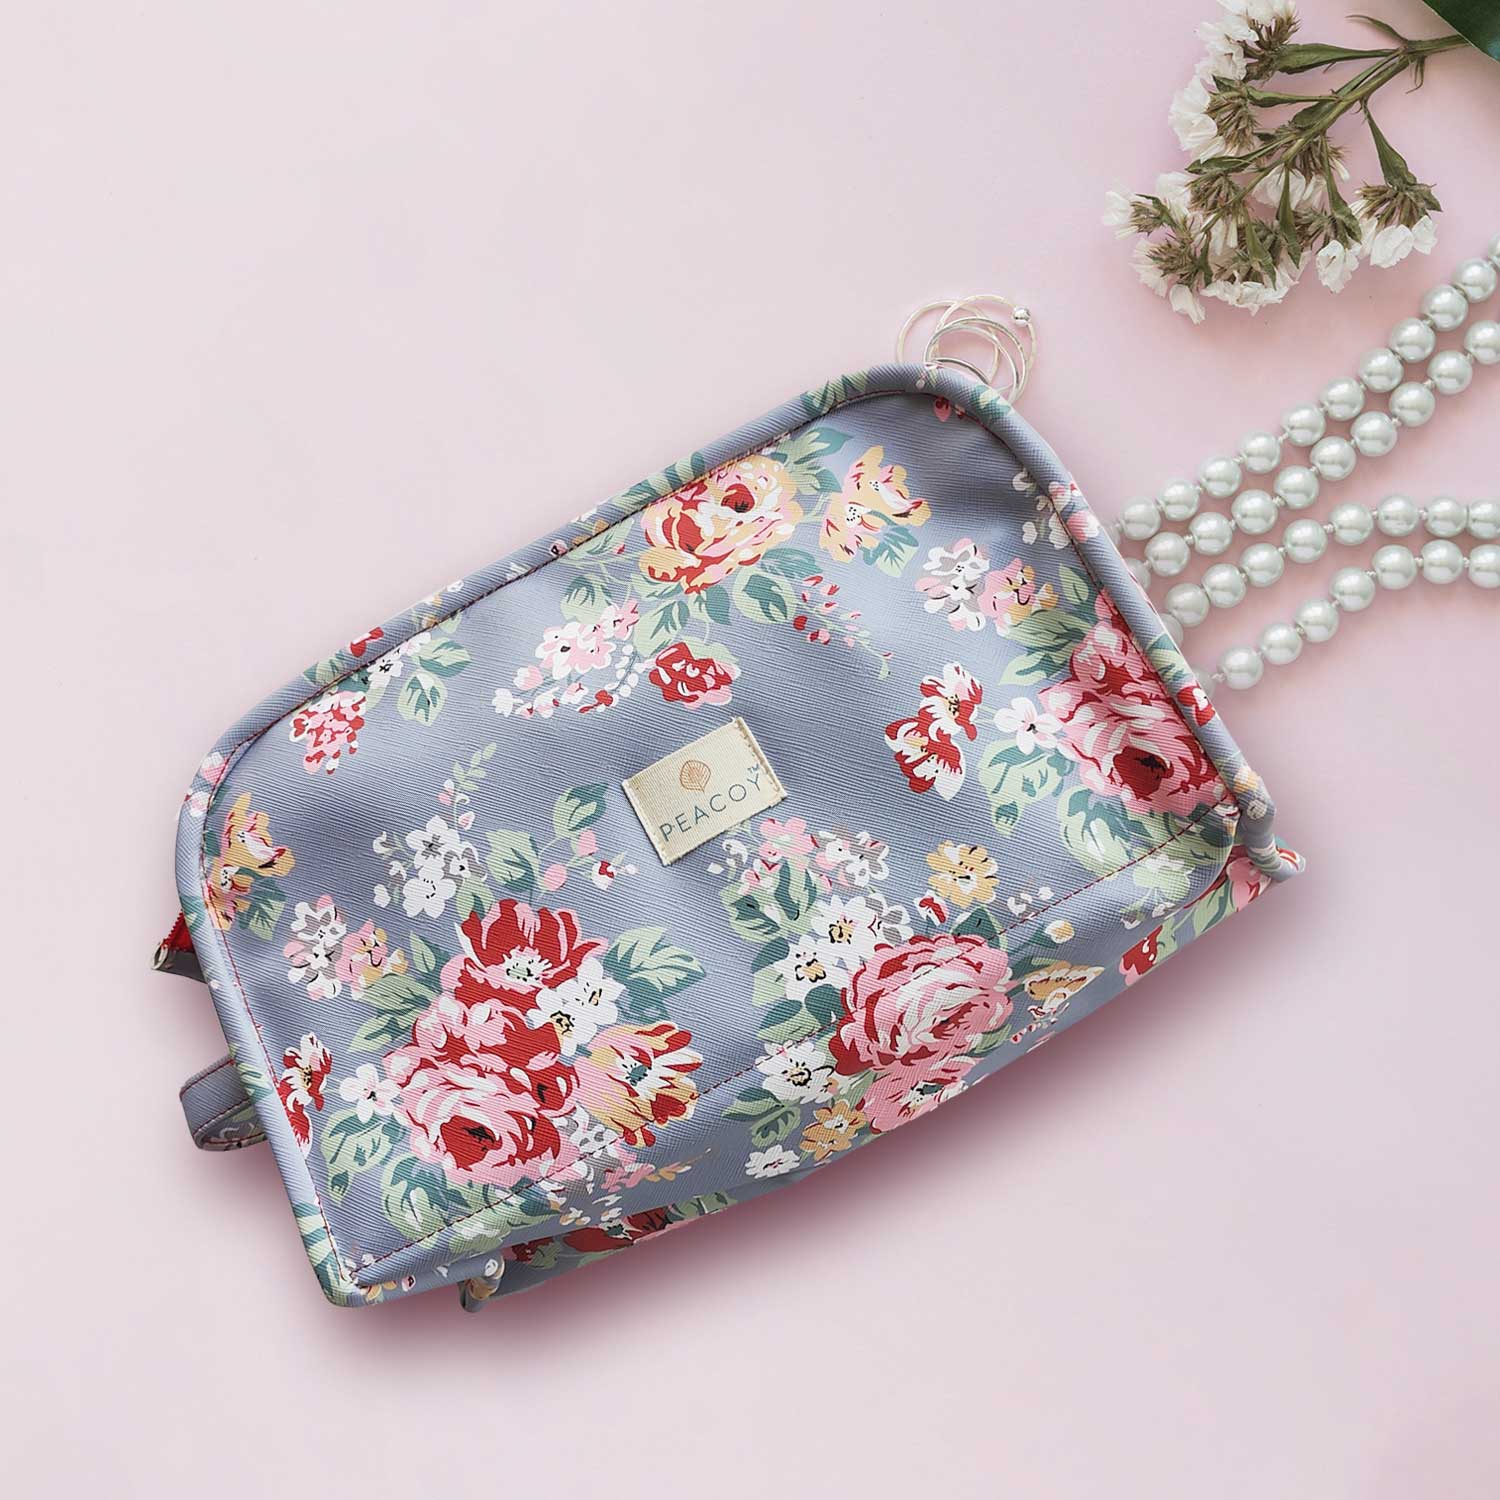 Blue Floral Essentials  Makeup Pouch, Cosmetic Bag Stylish Pouch for Makeup Accessories Travel Organiser Vanity Kit Stationery Toiletry Bag Make up Pouch for Girls and Women